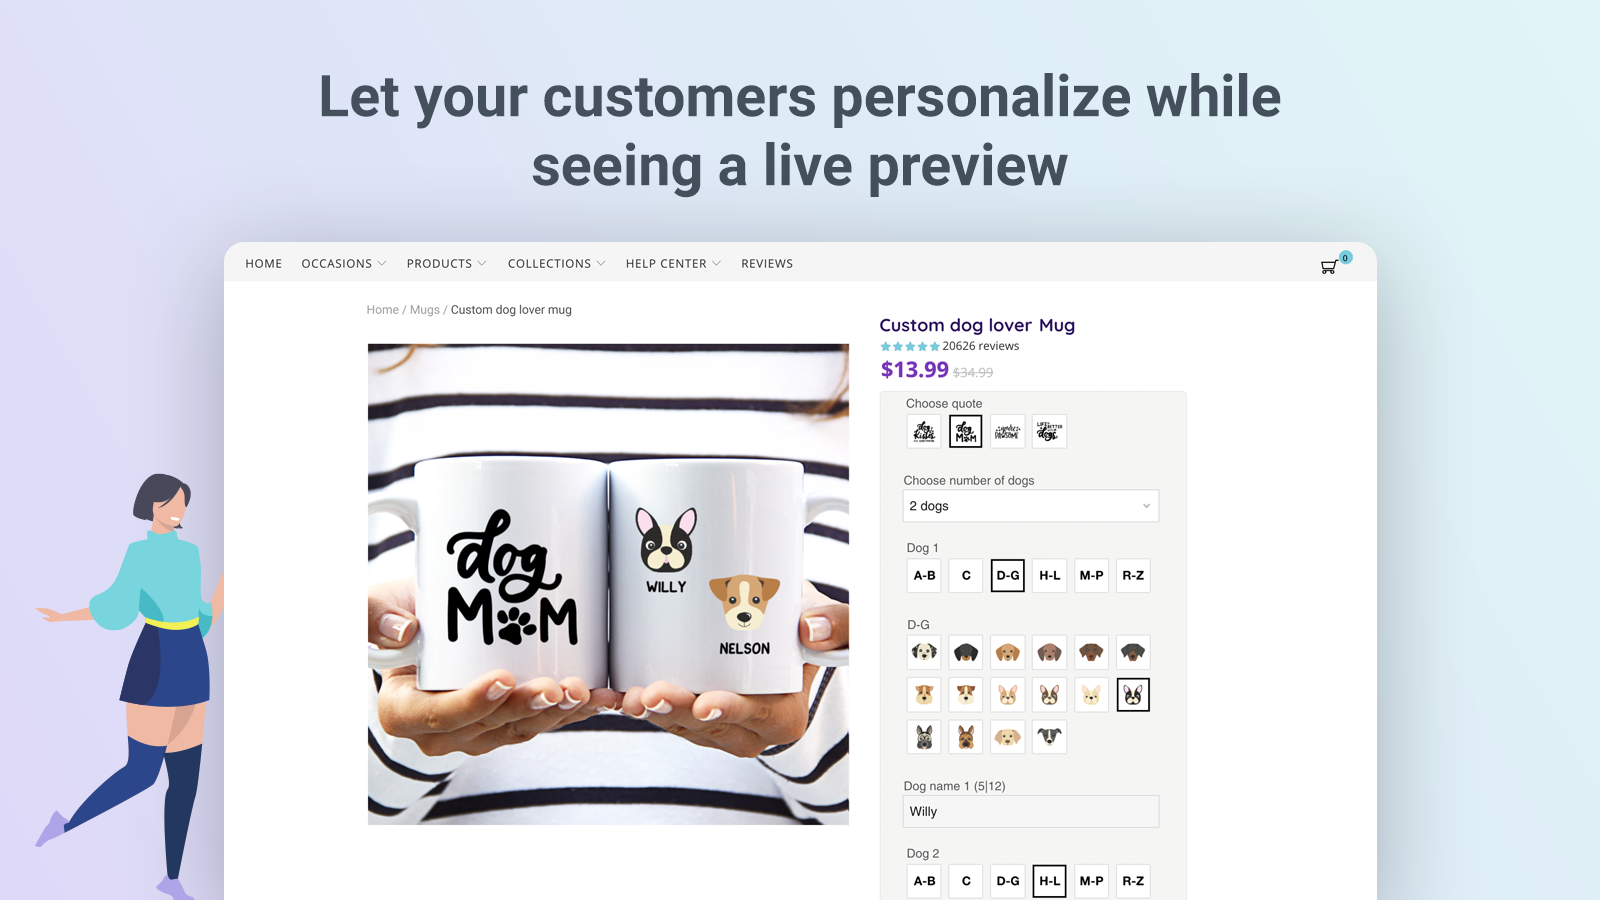 Let your customers personalize while seeing a live preview.